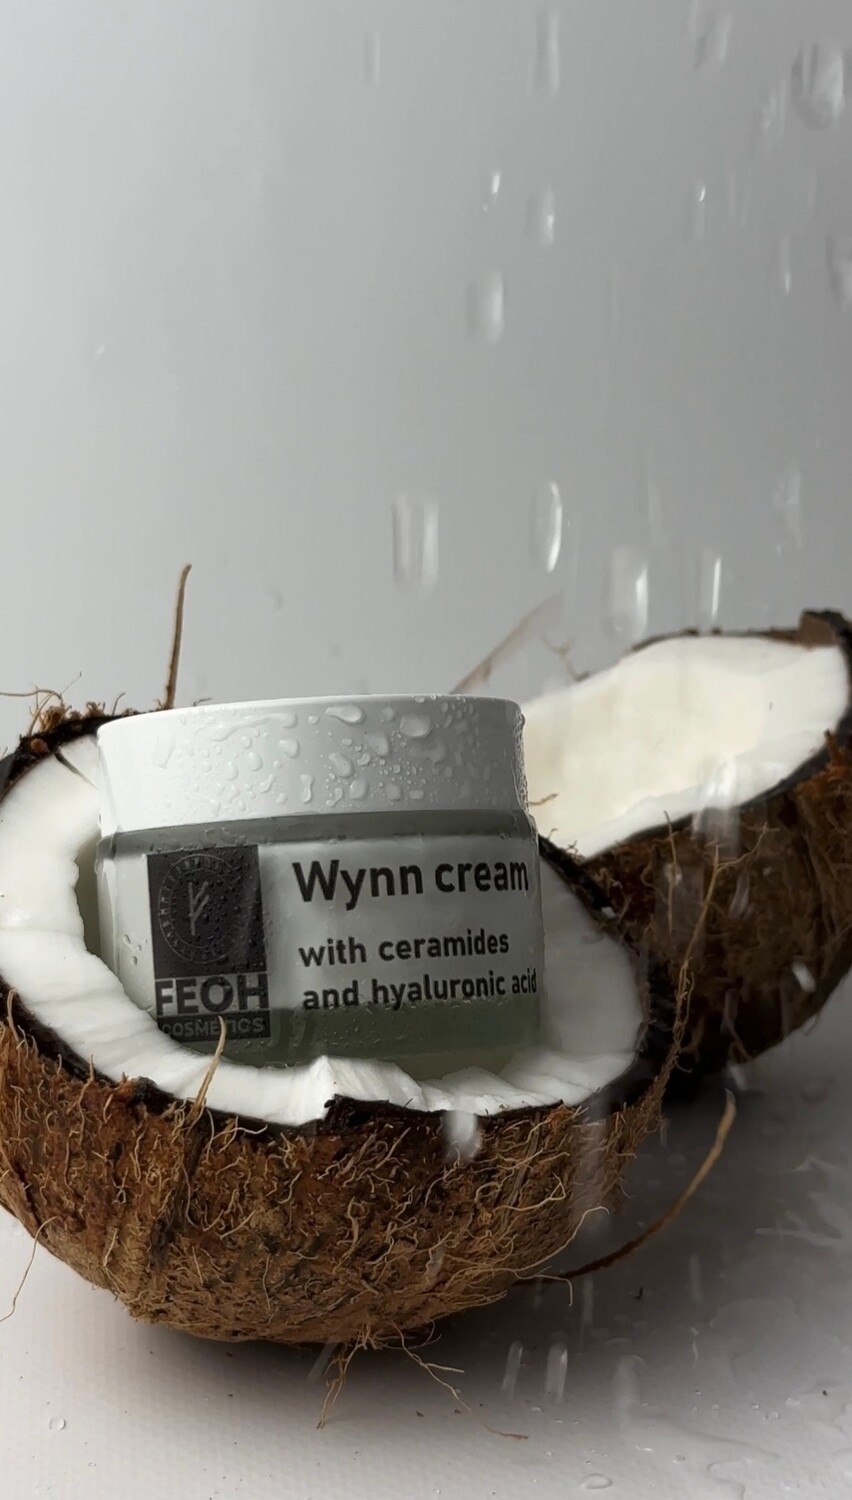 Wynn cream with ceramides and hyaluronic acid